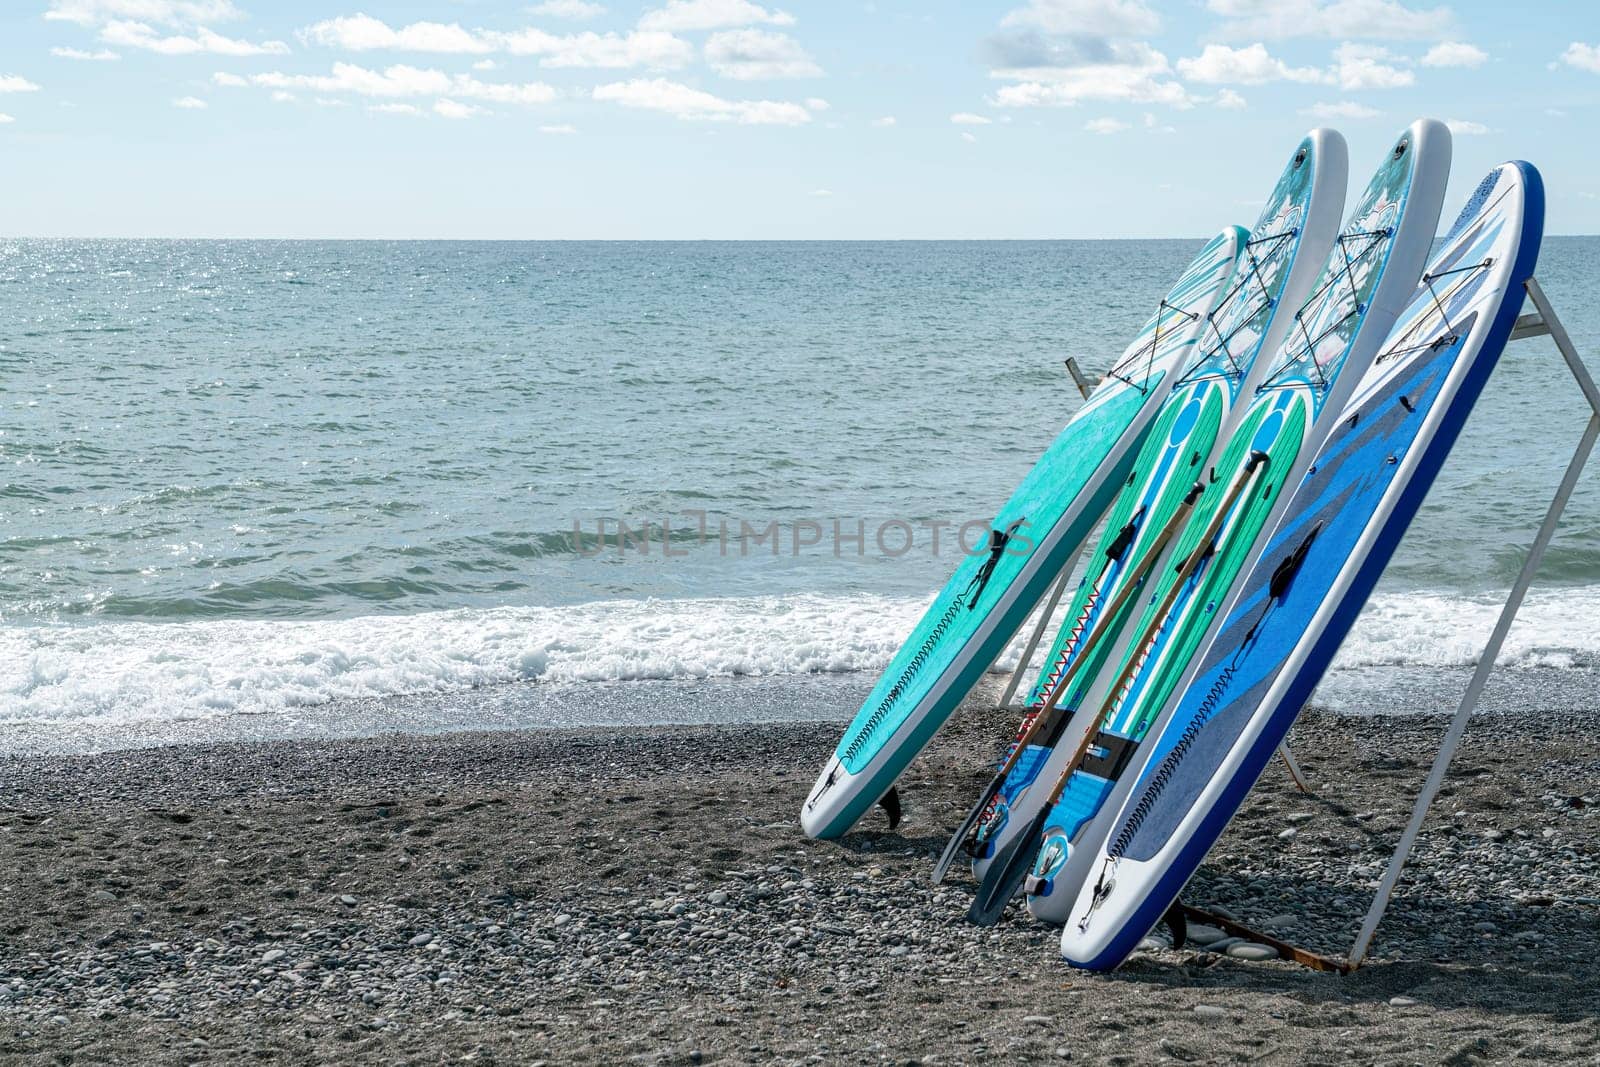 surfboards on the seashore against the blue sky. photo